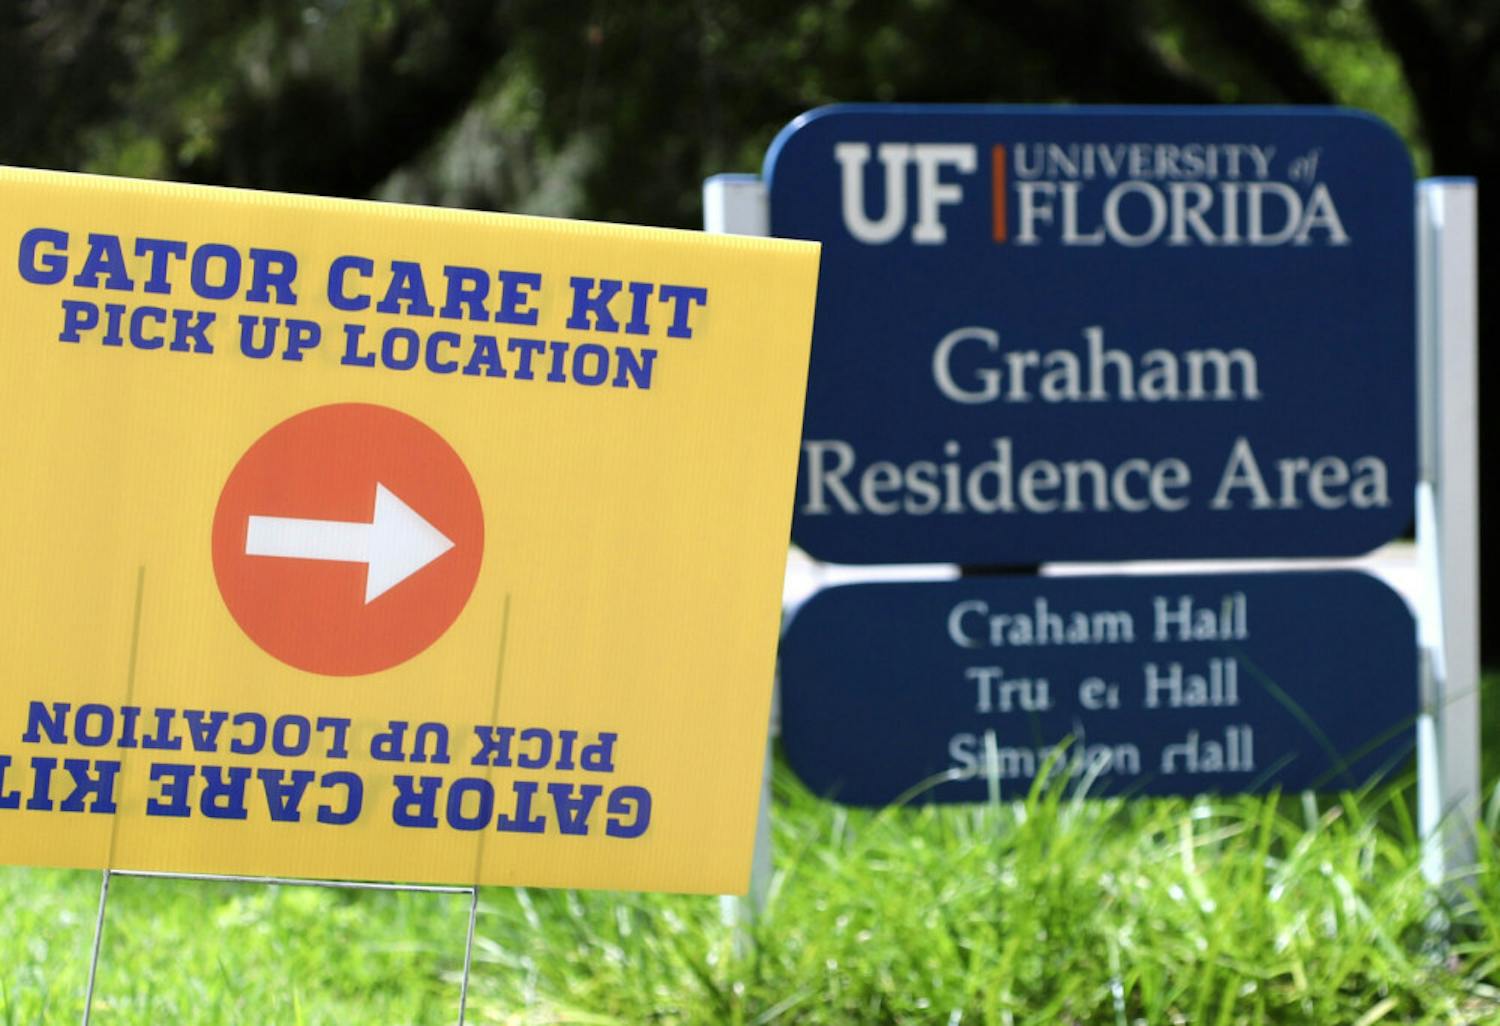 Gator Care Kits and UF 24 t-shirts are seen on August 26, 2020 at various locations to UF students on campus through October 2. Kits include two masks, hand sanitizer, antibacterial wipes, tissues, a stylus pen and a GatorWell first-aid pack with the option of a thermometer or anti-fog spray.